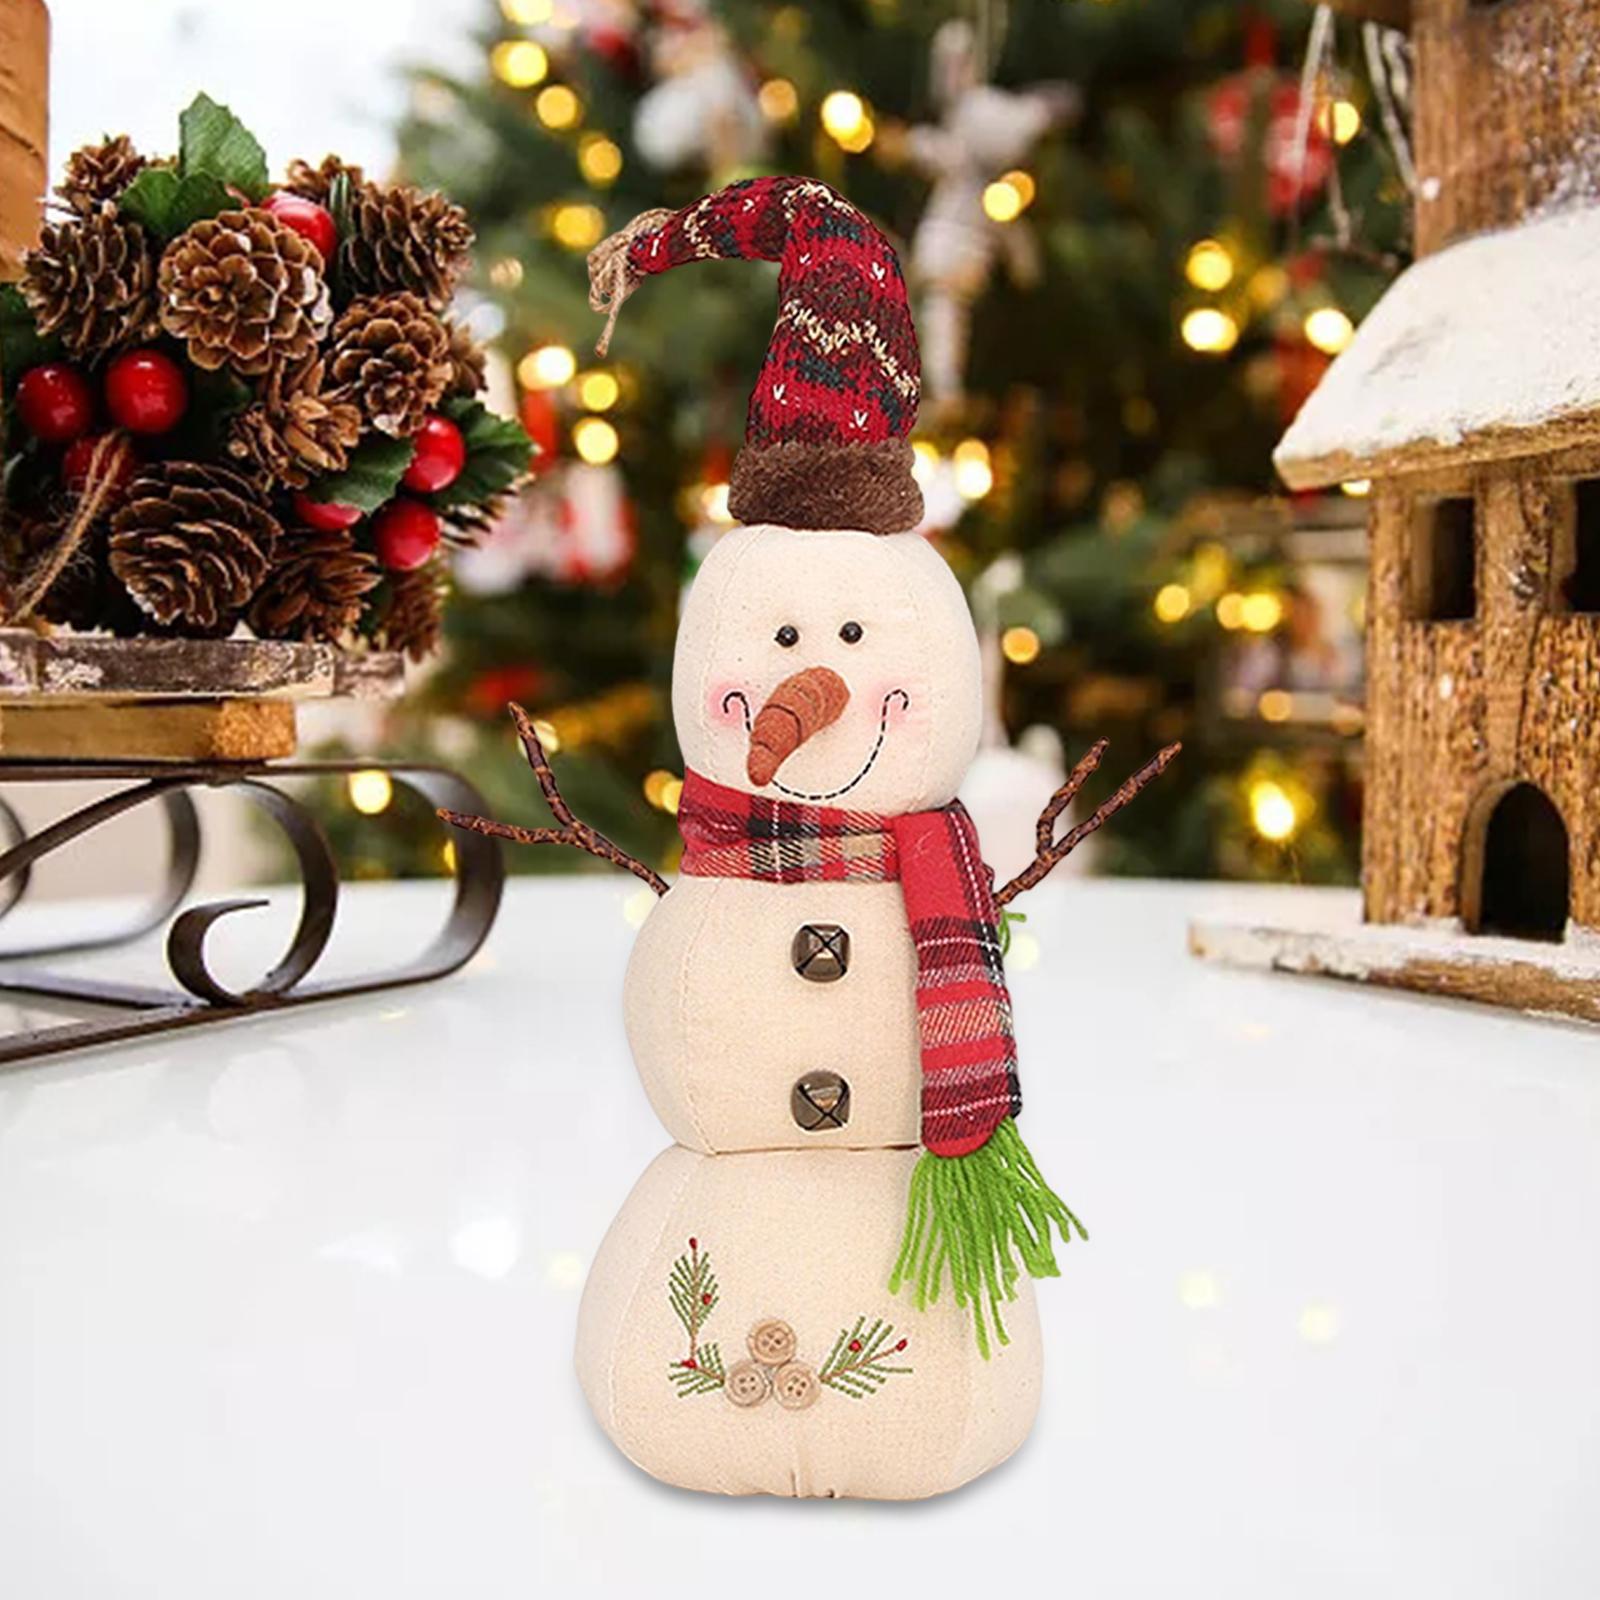 Christmas White Snowman Doll Figurines Plush for Fireplace Atmosphere Decor